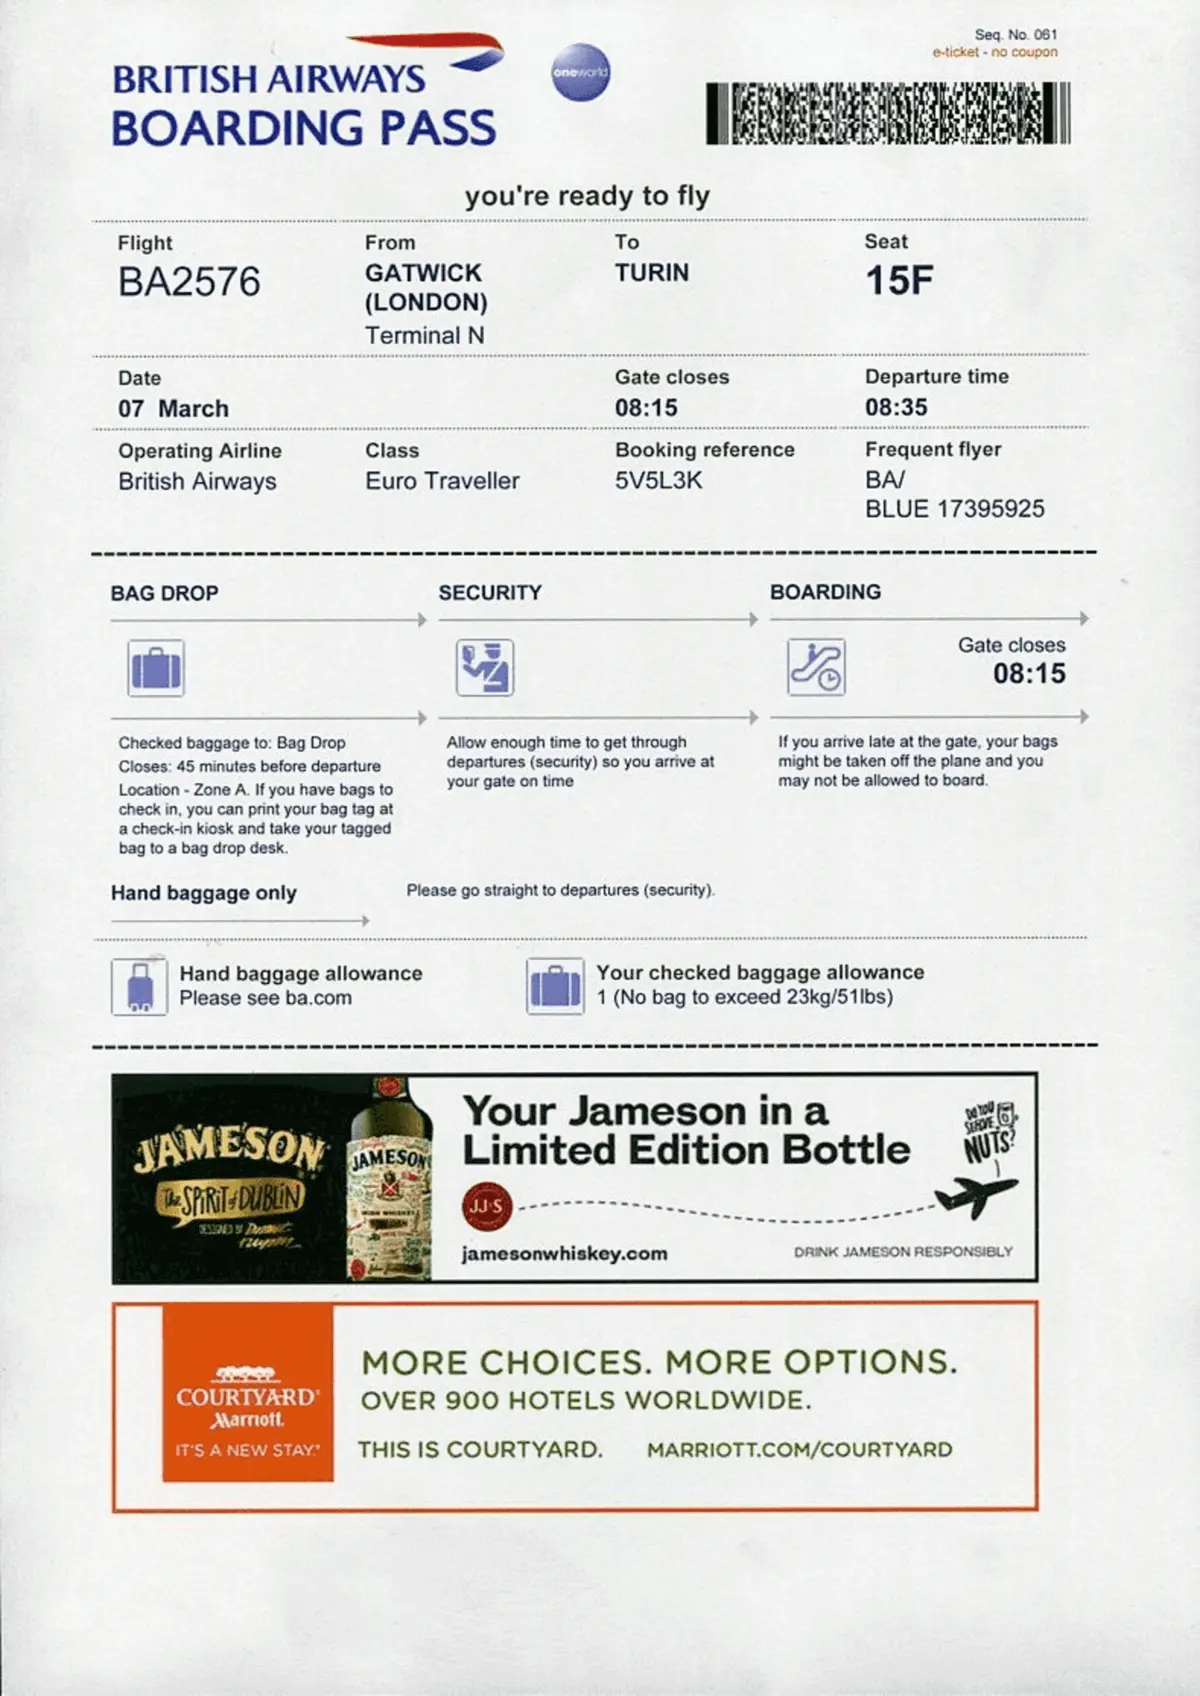 Los-Angeles Airport Lax Advertising Boarding Passes A1